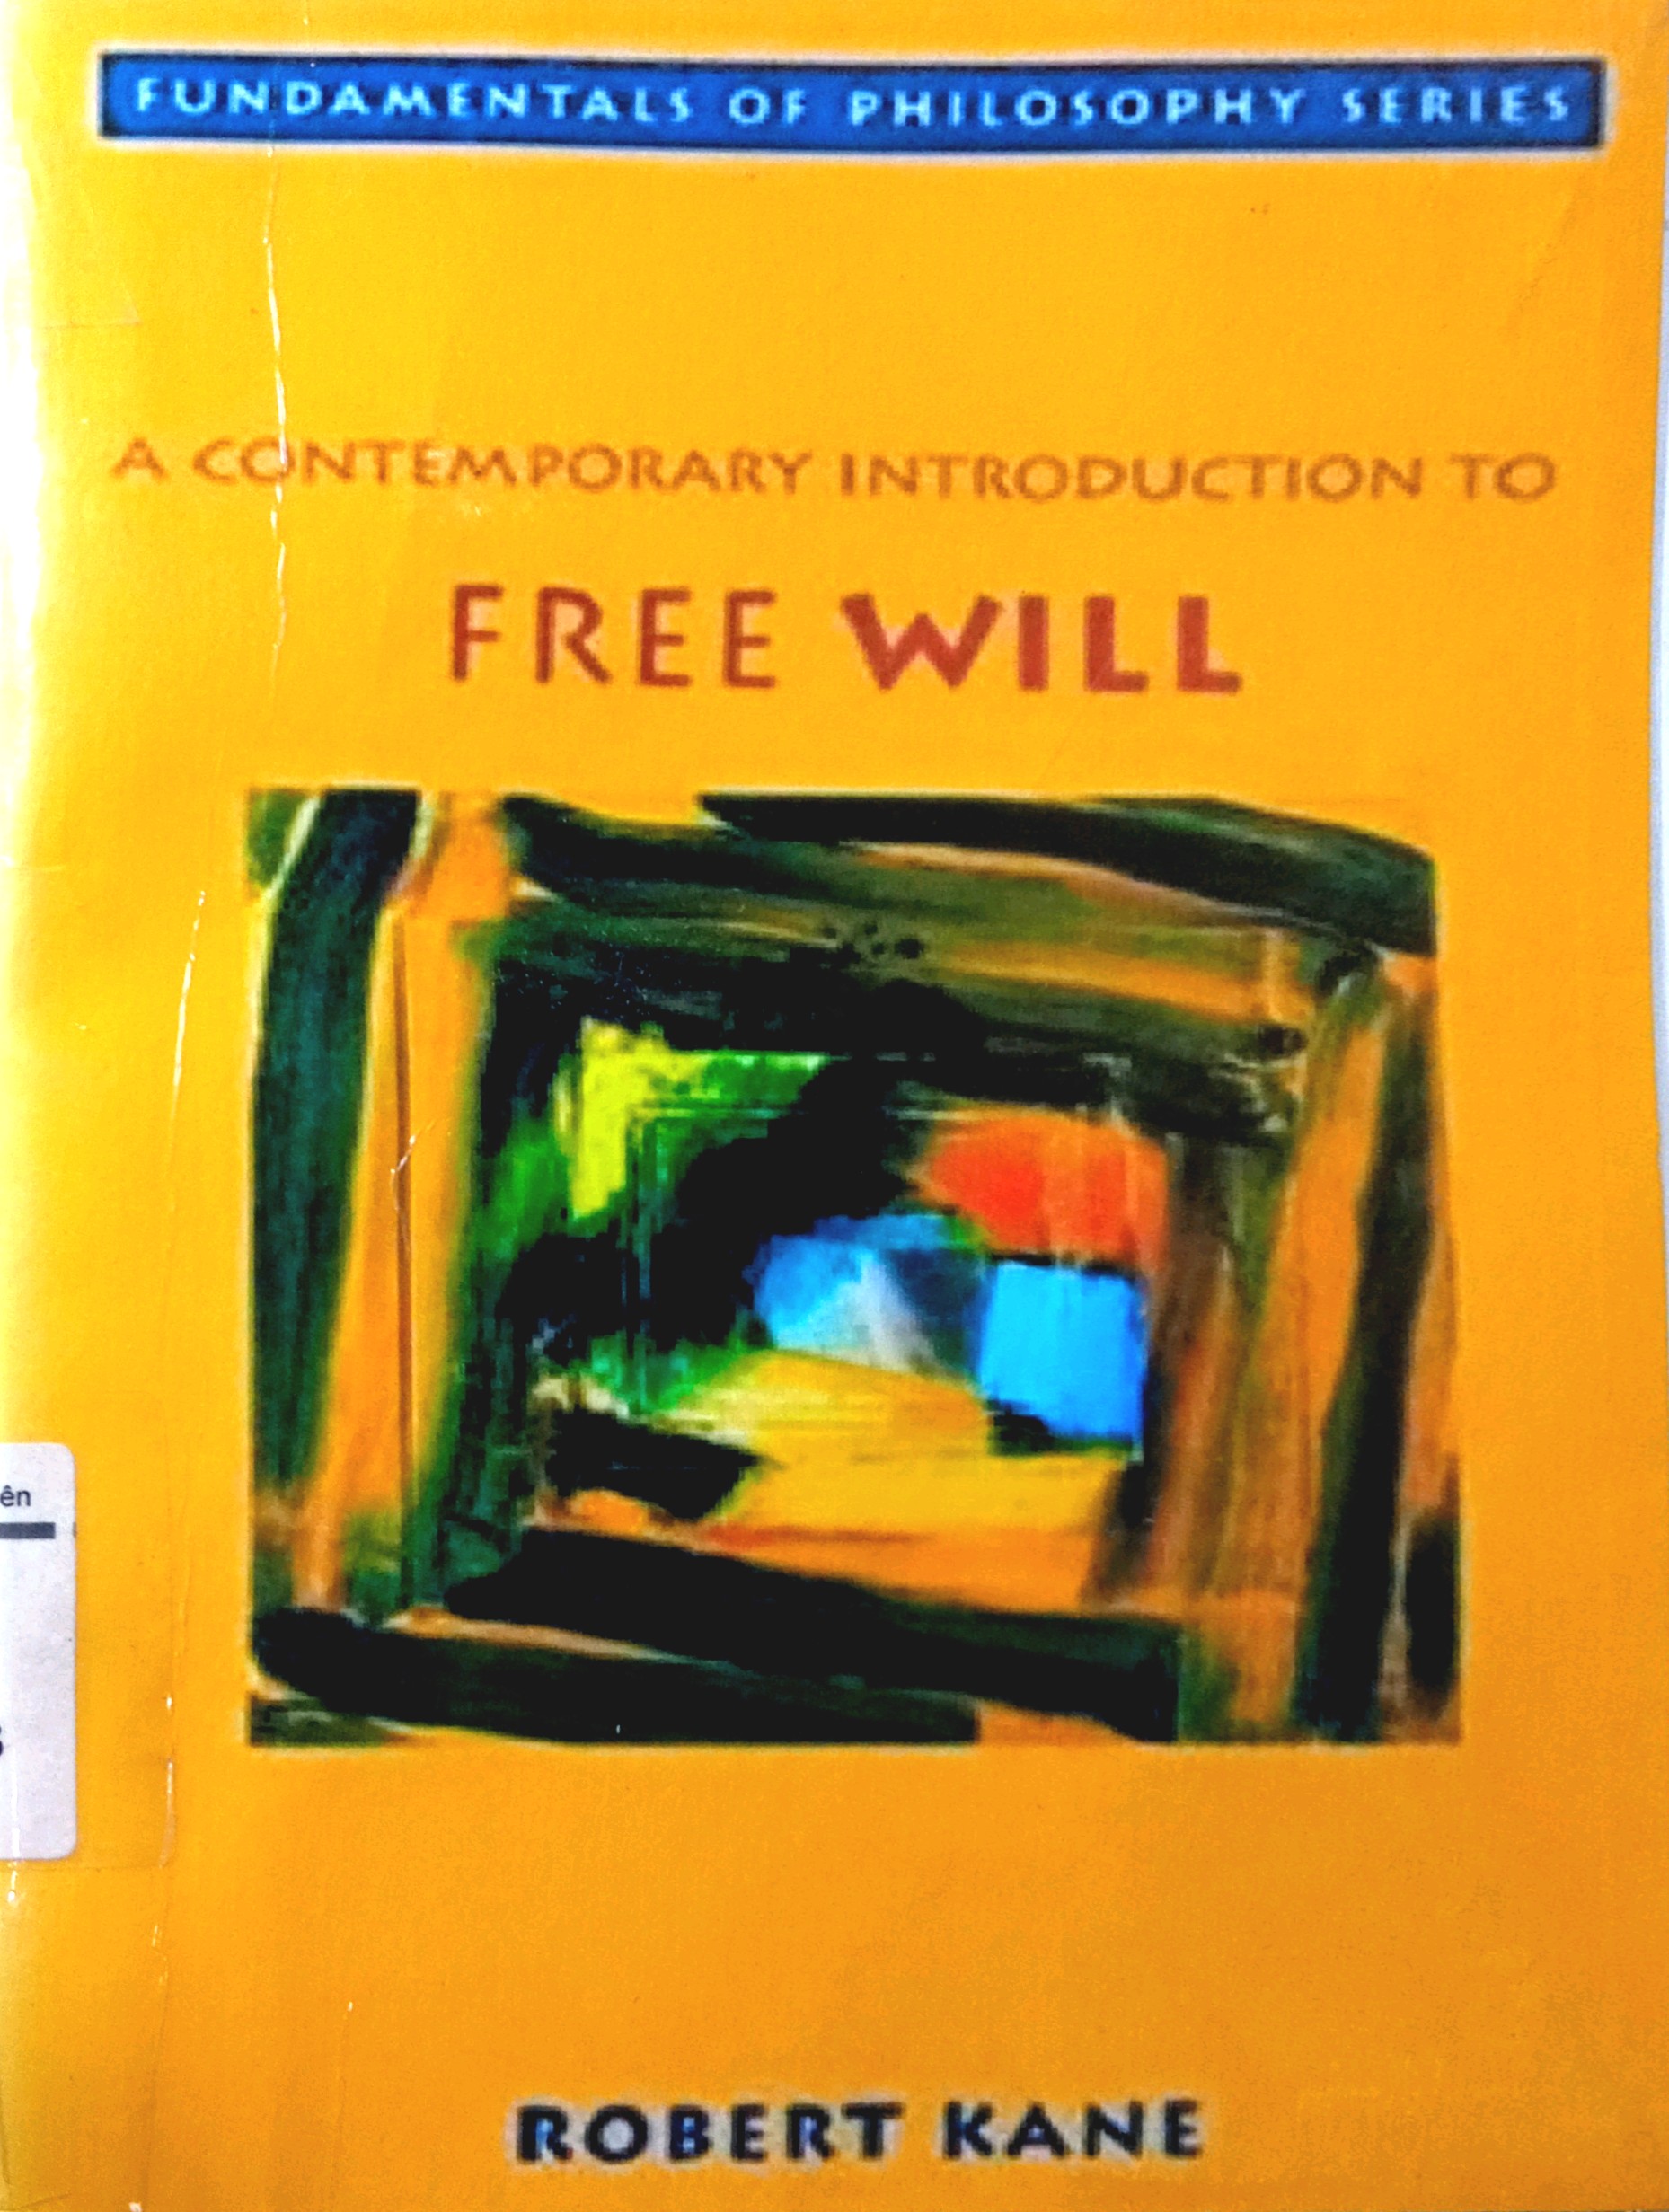 A CONTEMPORARY INTRODUCTION TO FREE WILL